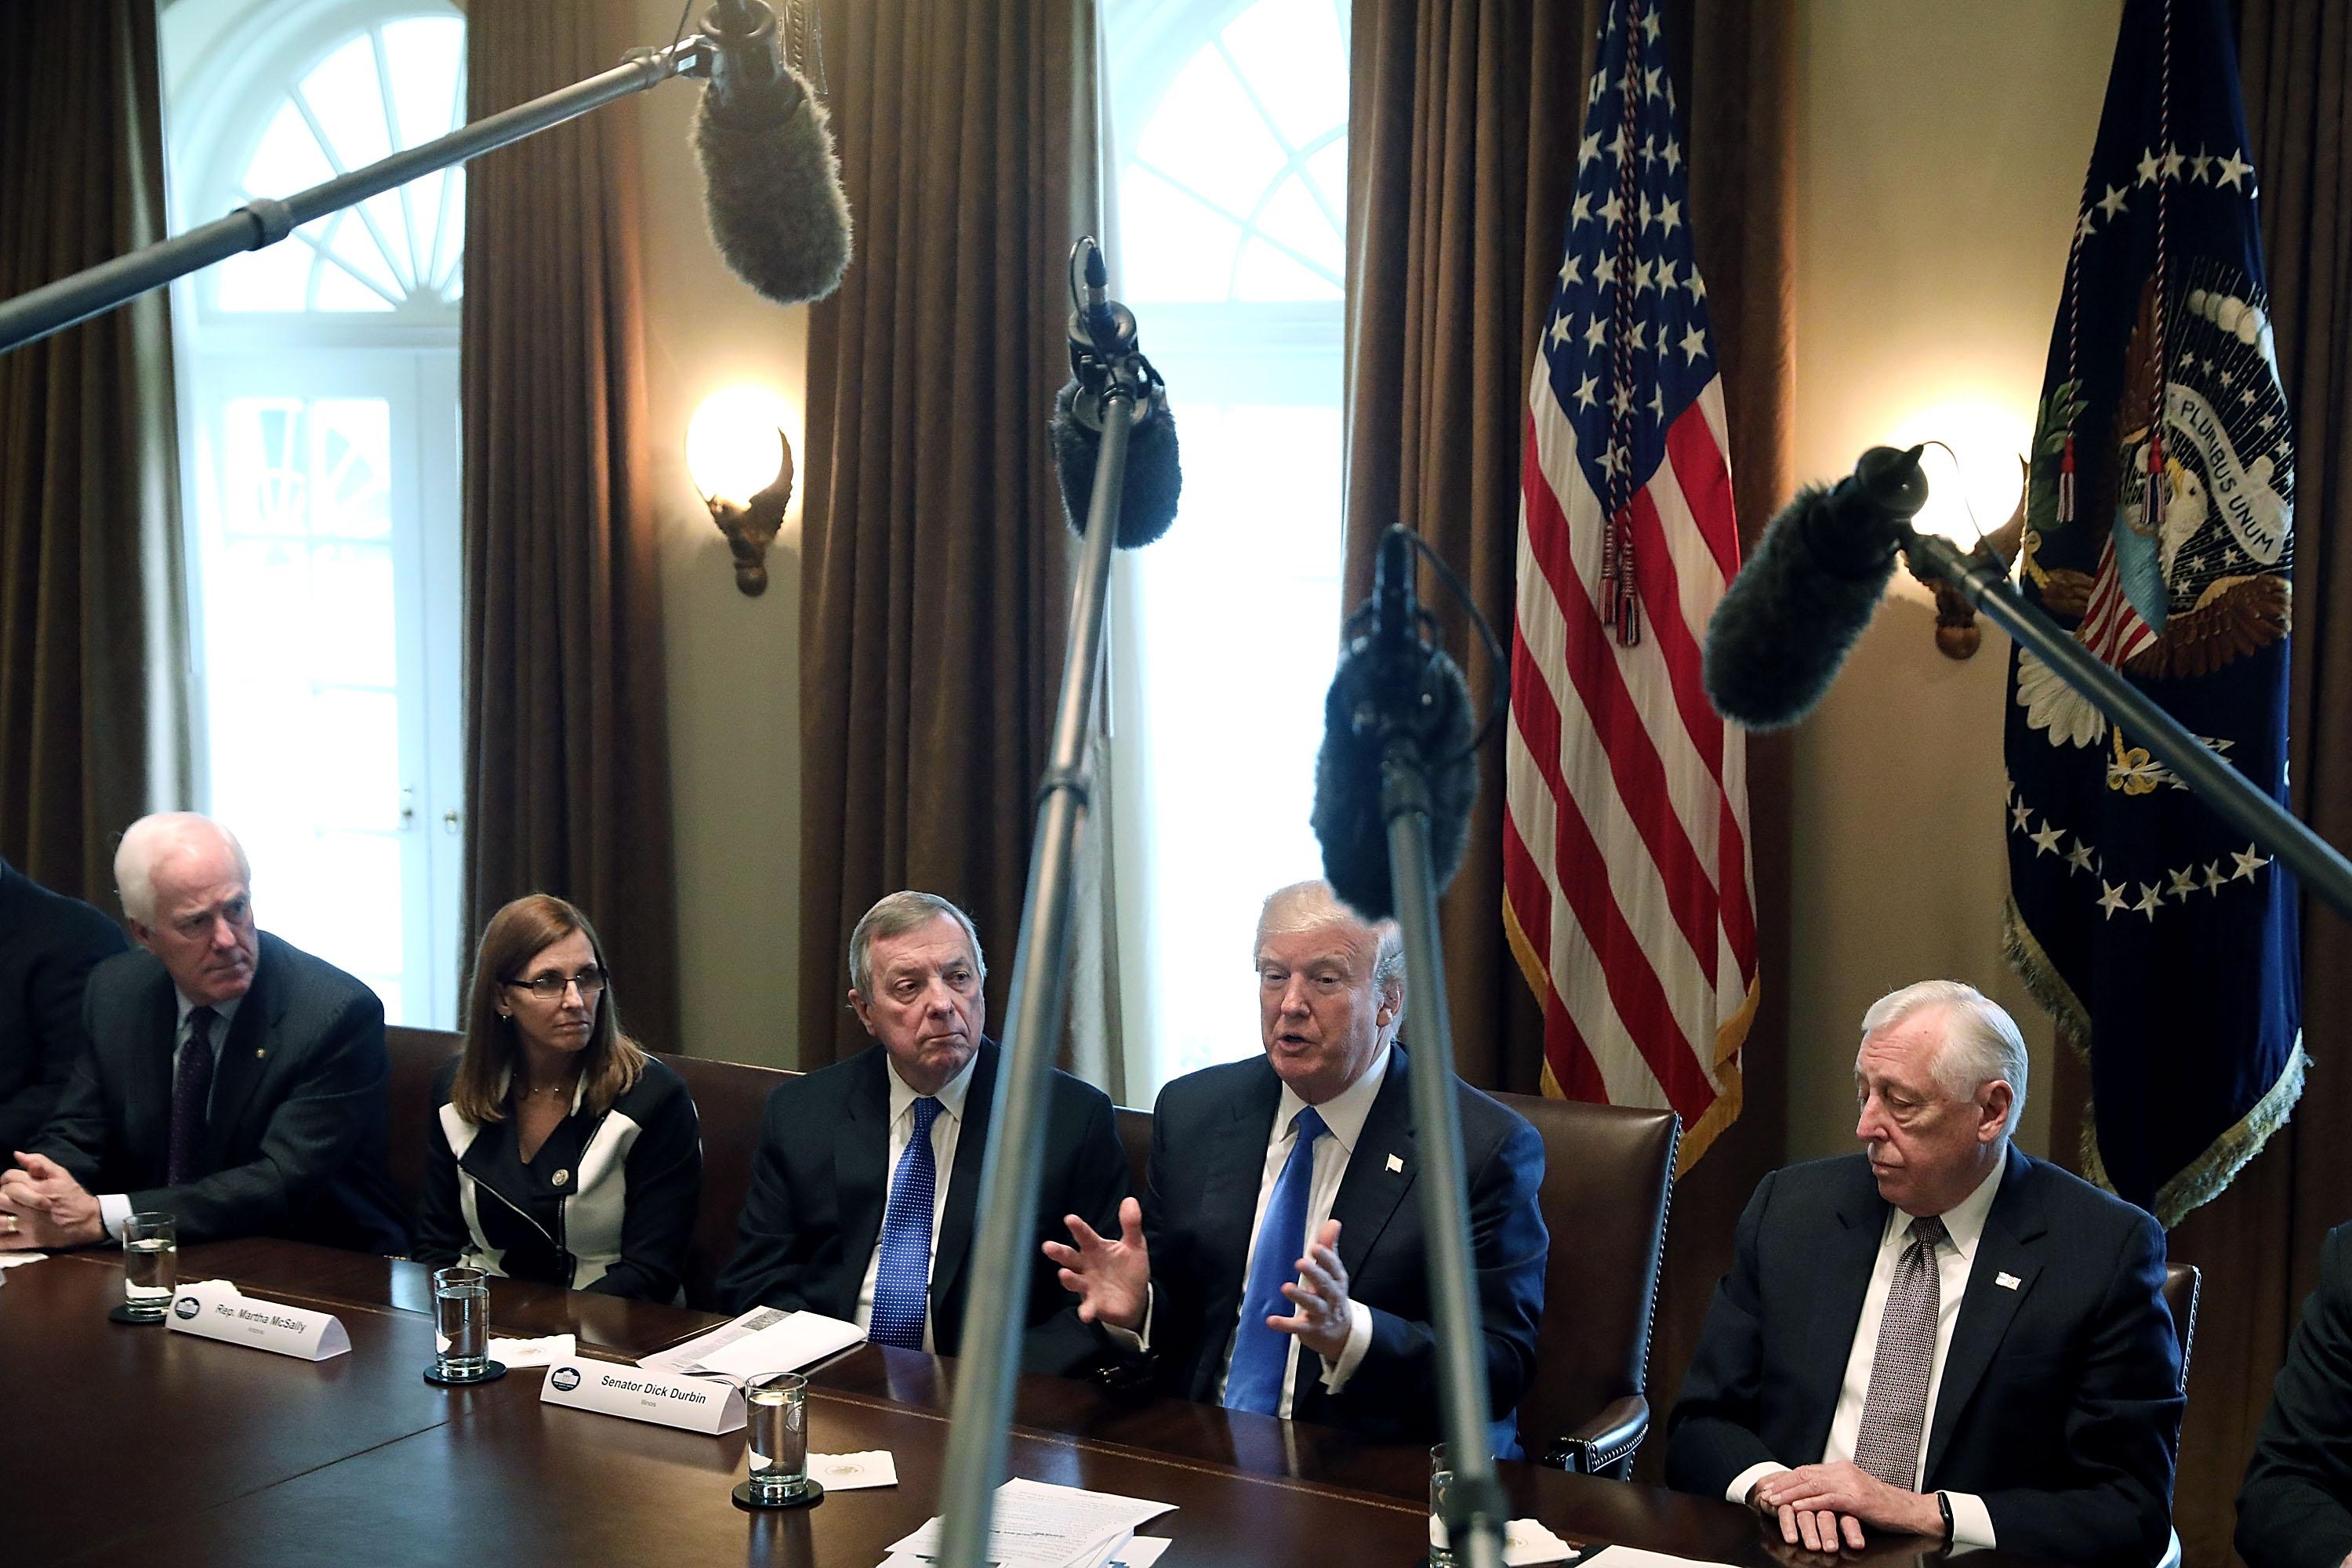 Rep. Martha McSally, second from left, at a White House immigration roundtable earlier this year.